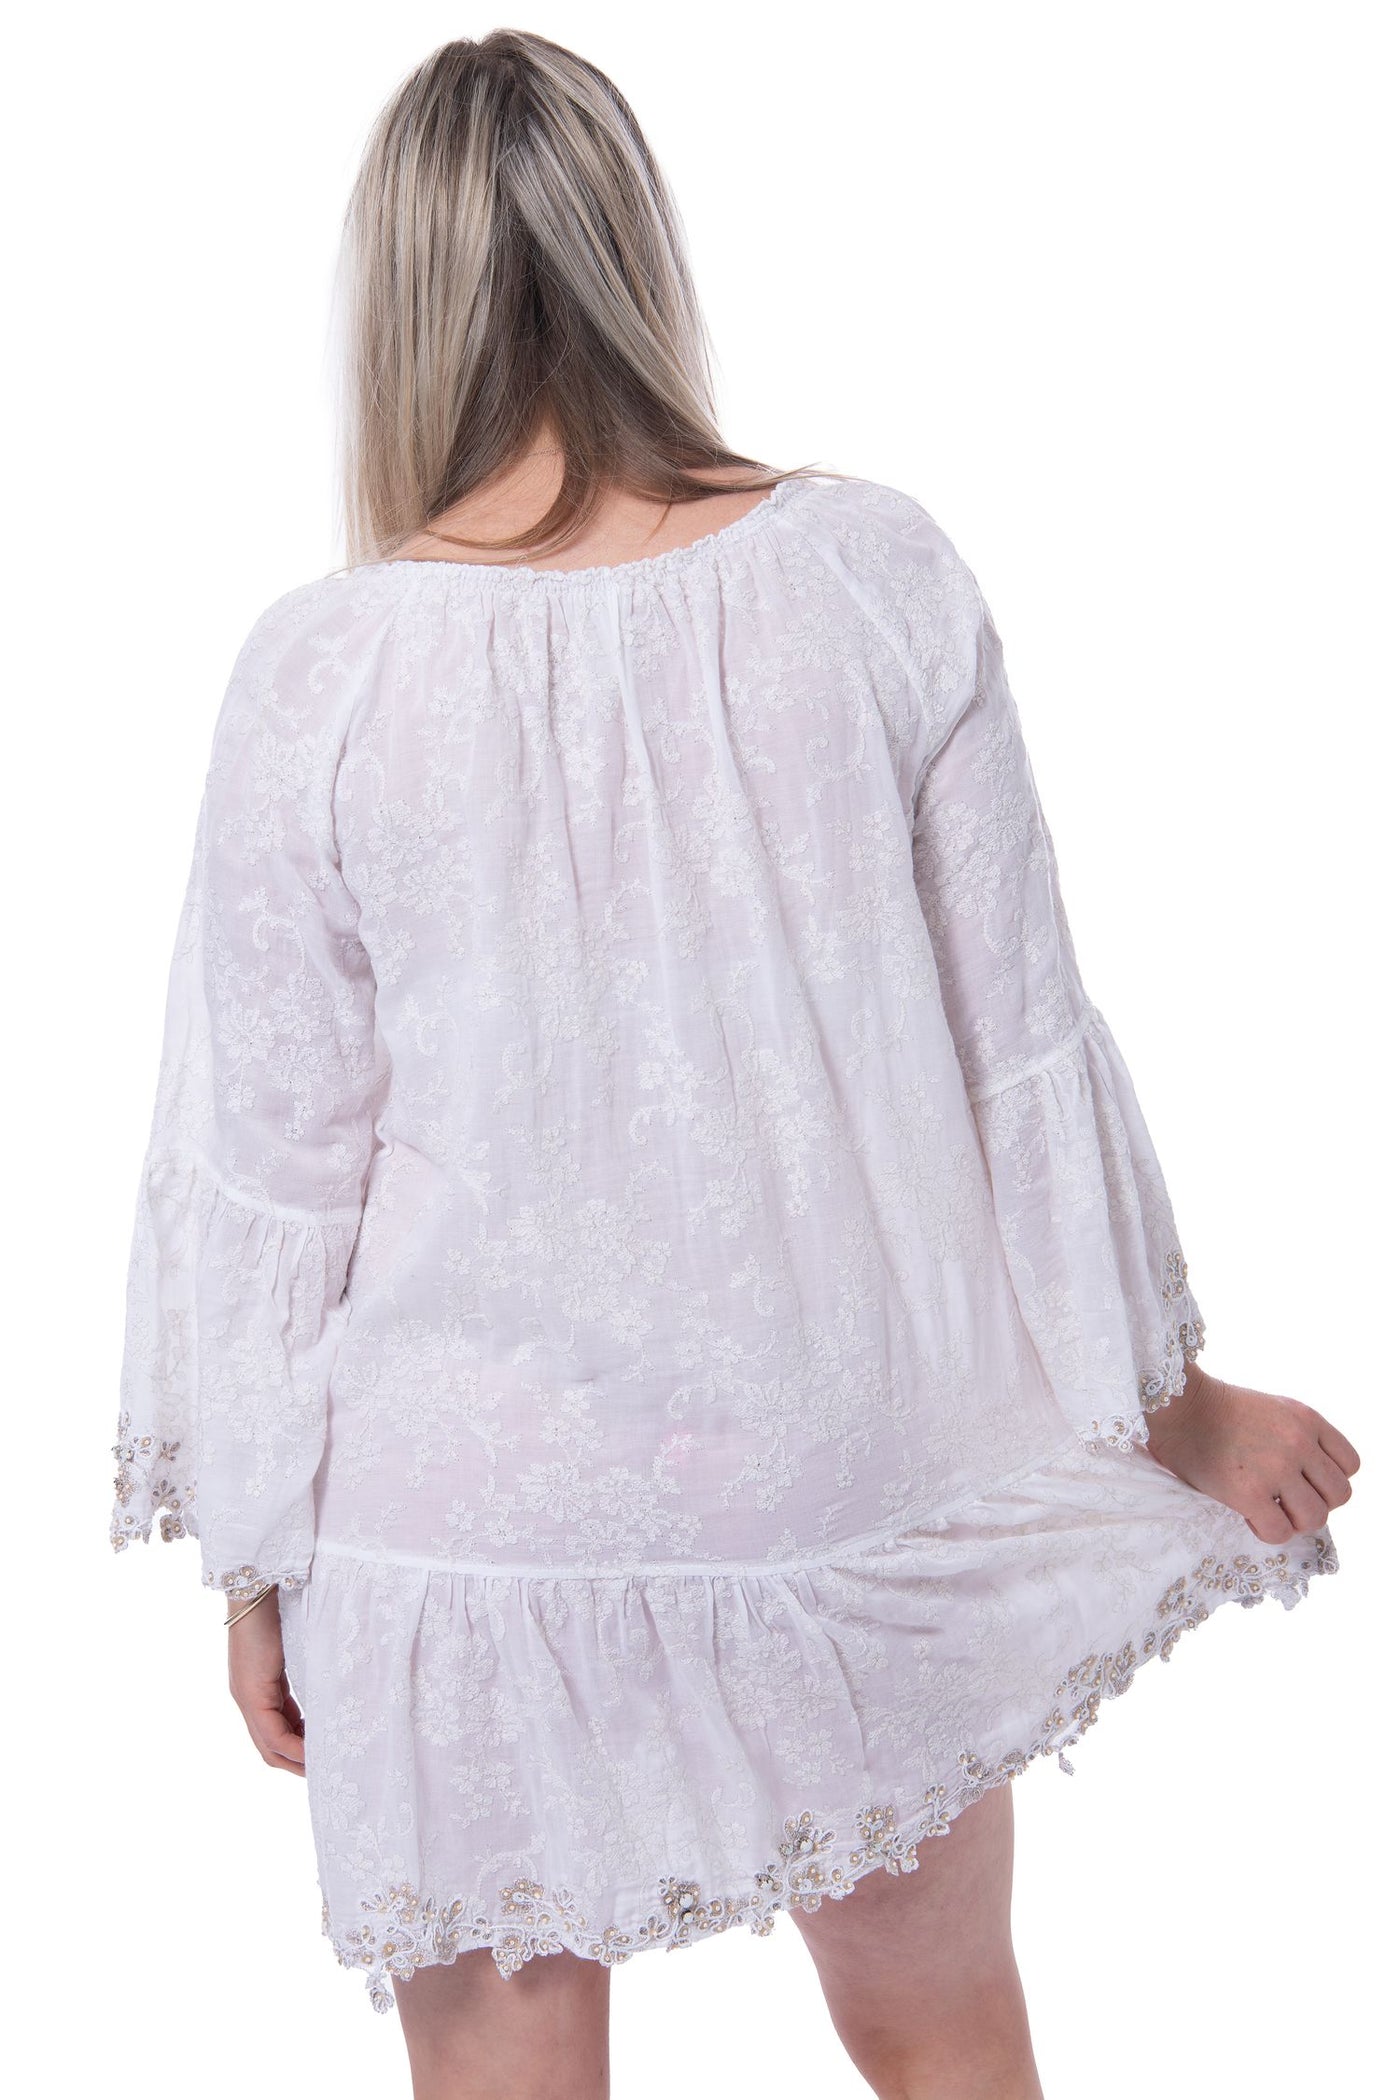 Emamo white sun cover up with embellishments